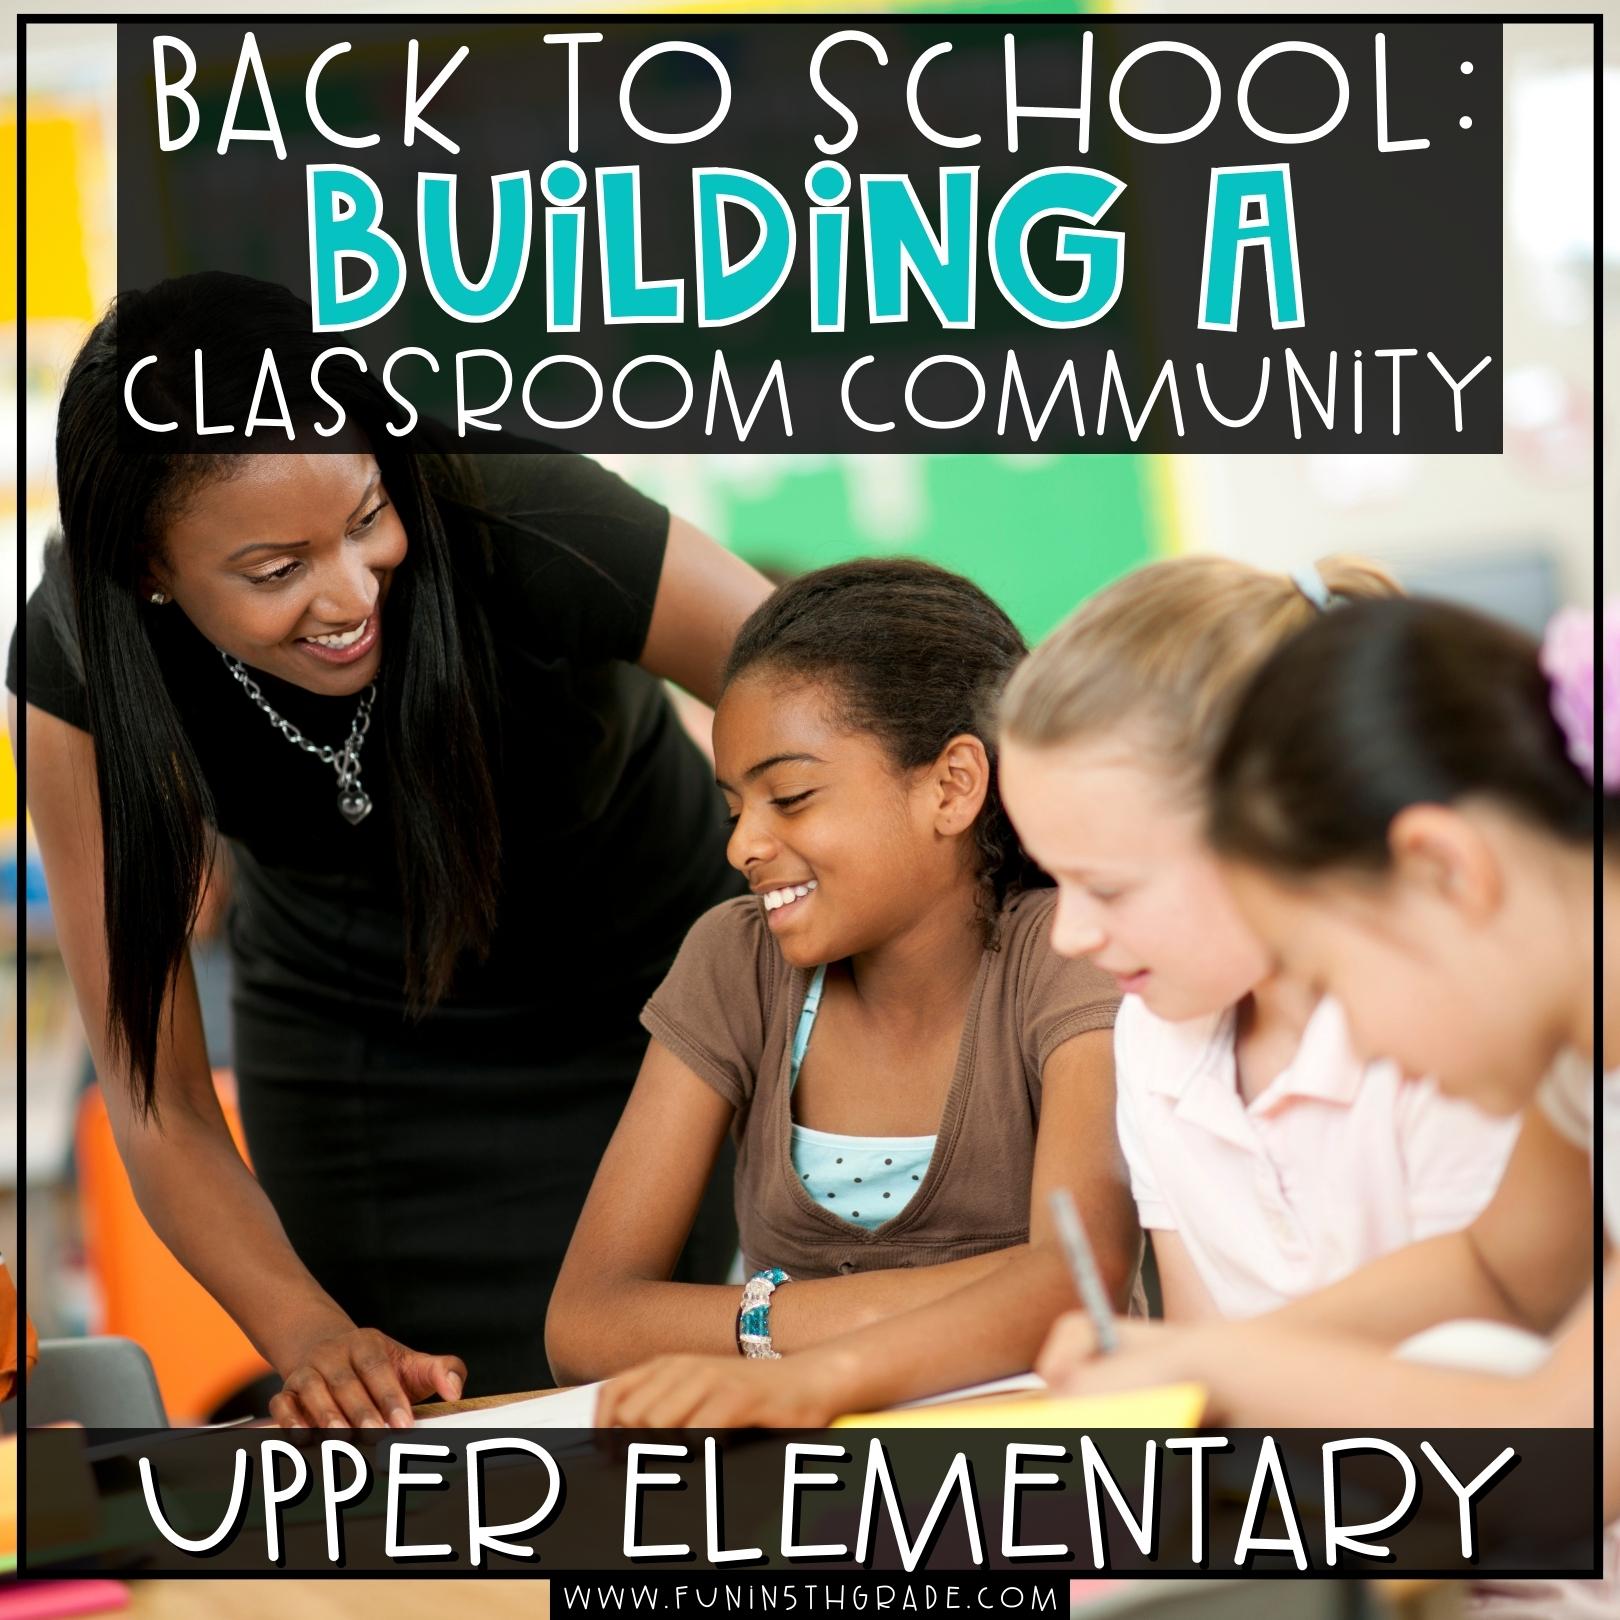 Back to School Building a Classroom Community Blog Image with elementary boy smiling at the camera